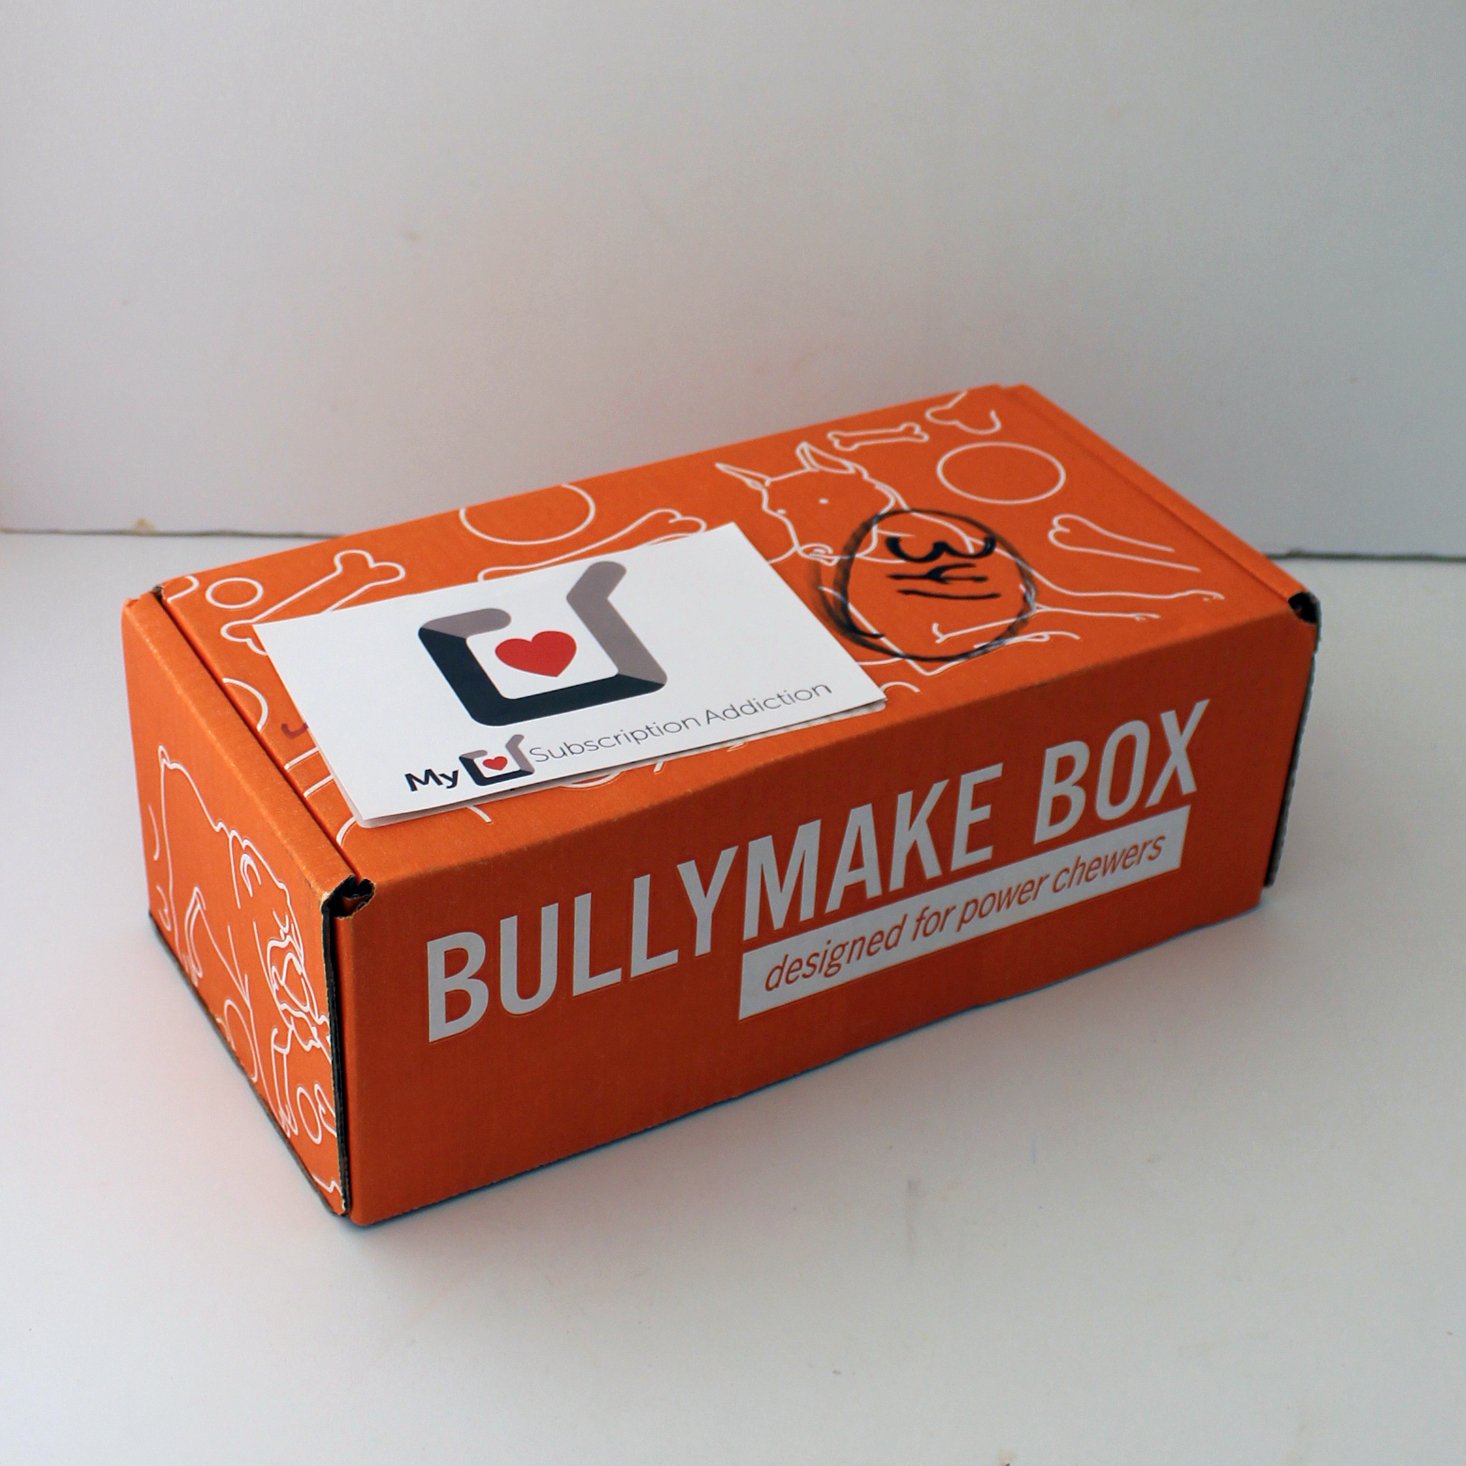 Bullymake Box Subscription Review + Coupon – September 2019